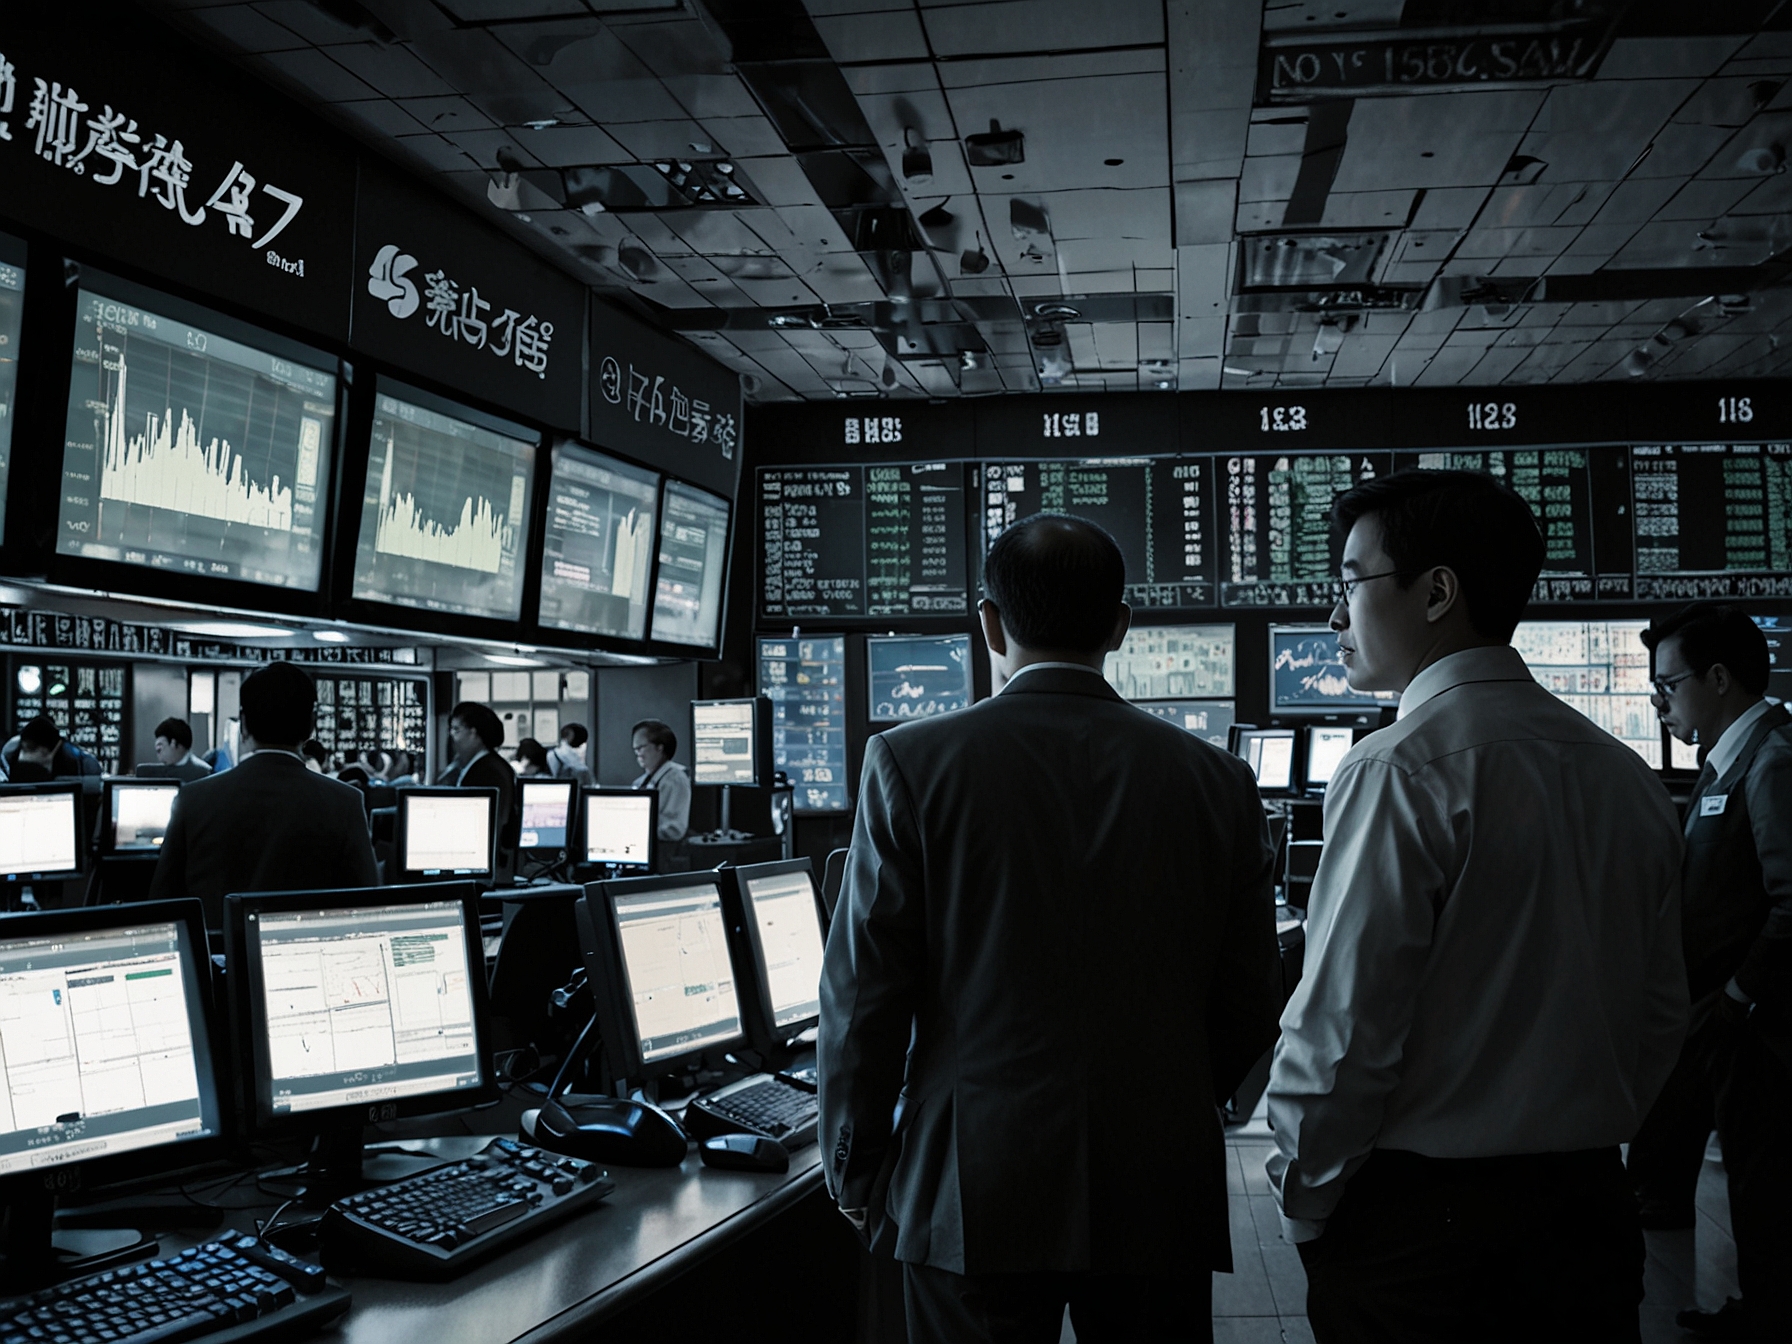 An illustration showing a bustling stock exchange with electronic boards displaying rising indices, symbolizing the optimistic trend in Asian stock markets following Wall Street's record high.